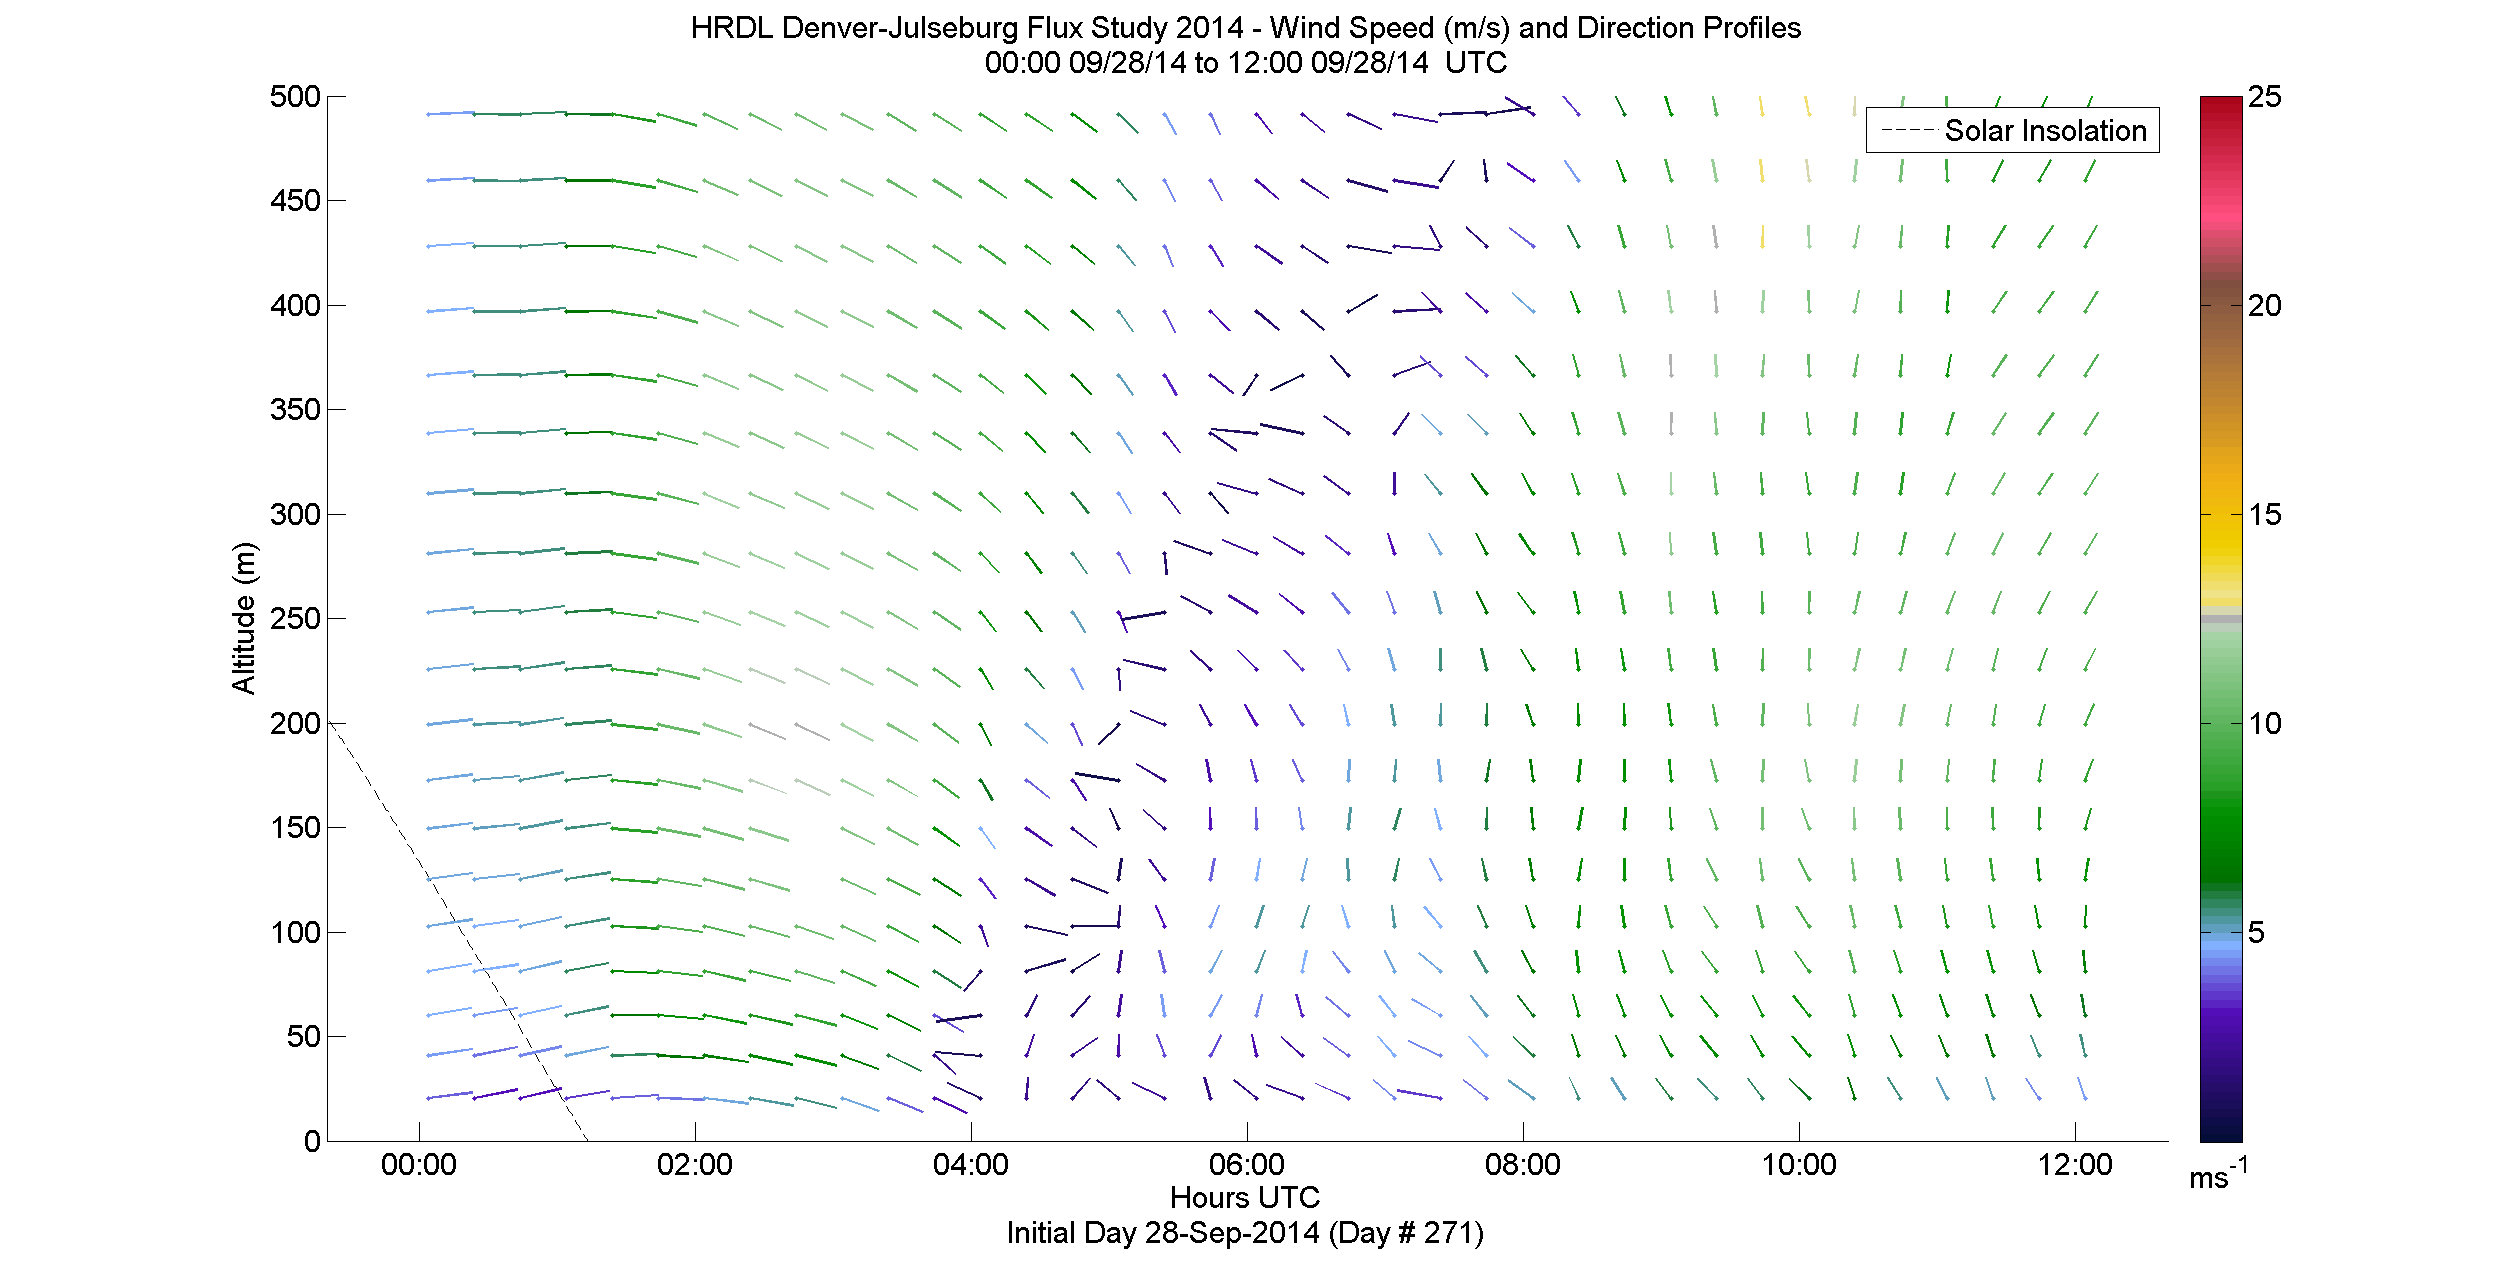 HRDL speed and direction profile - September 28 am